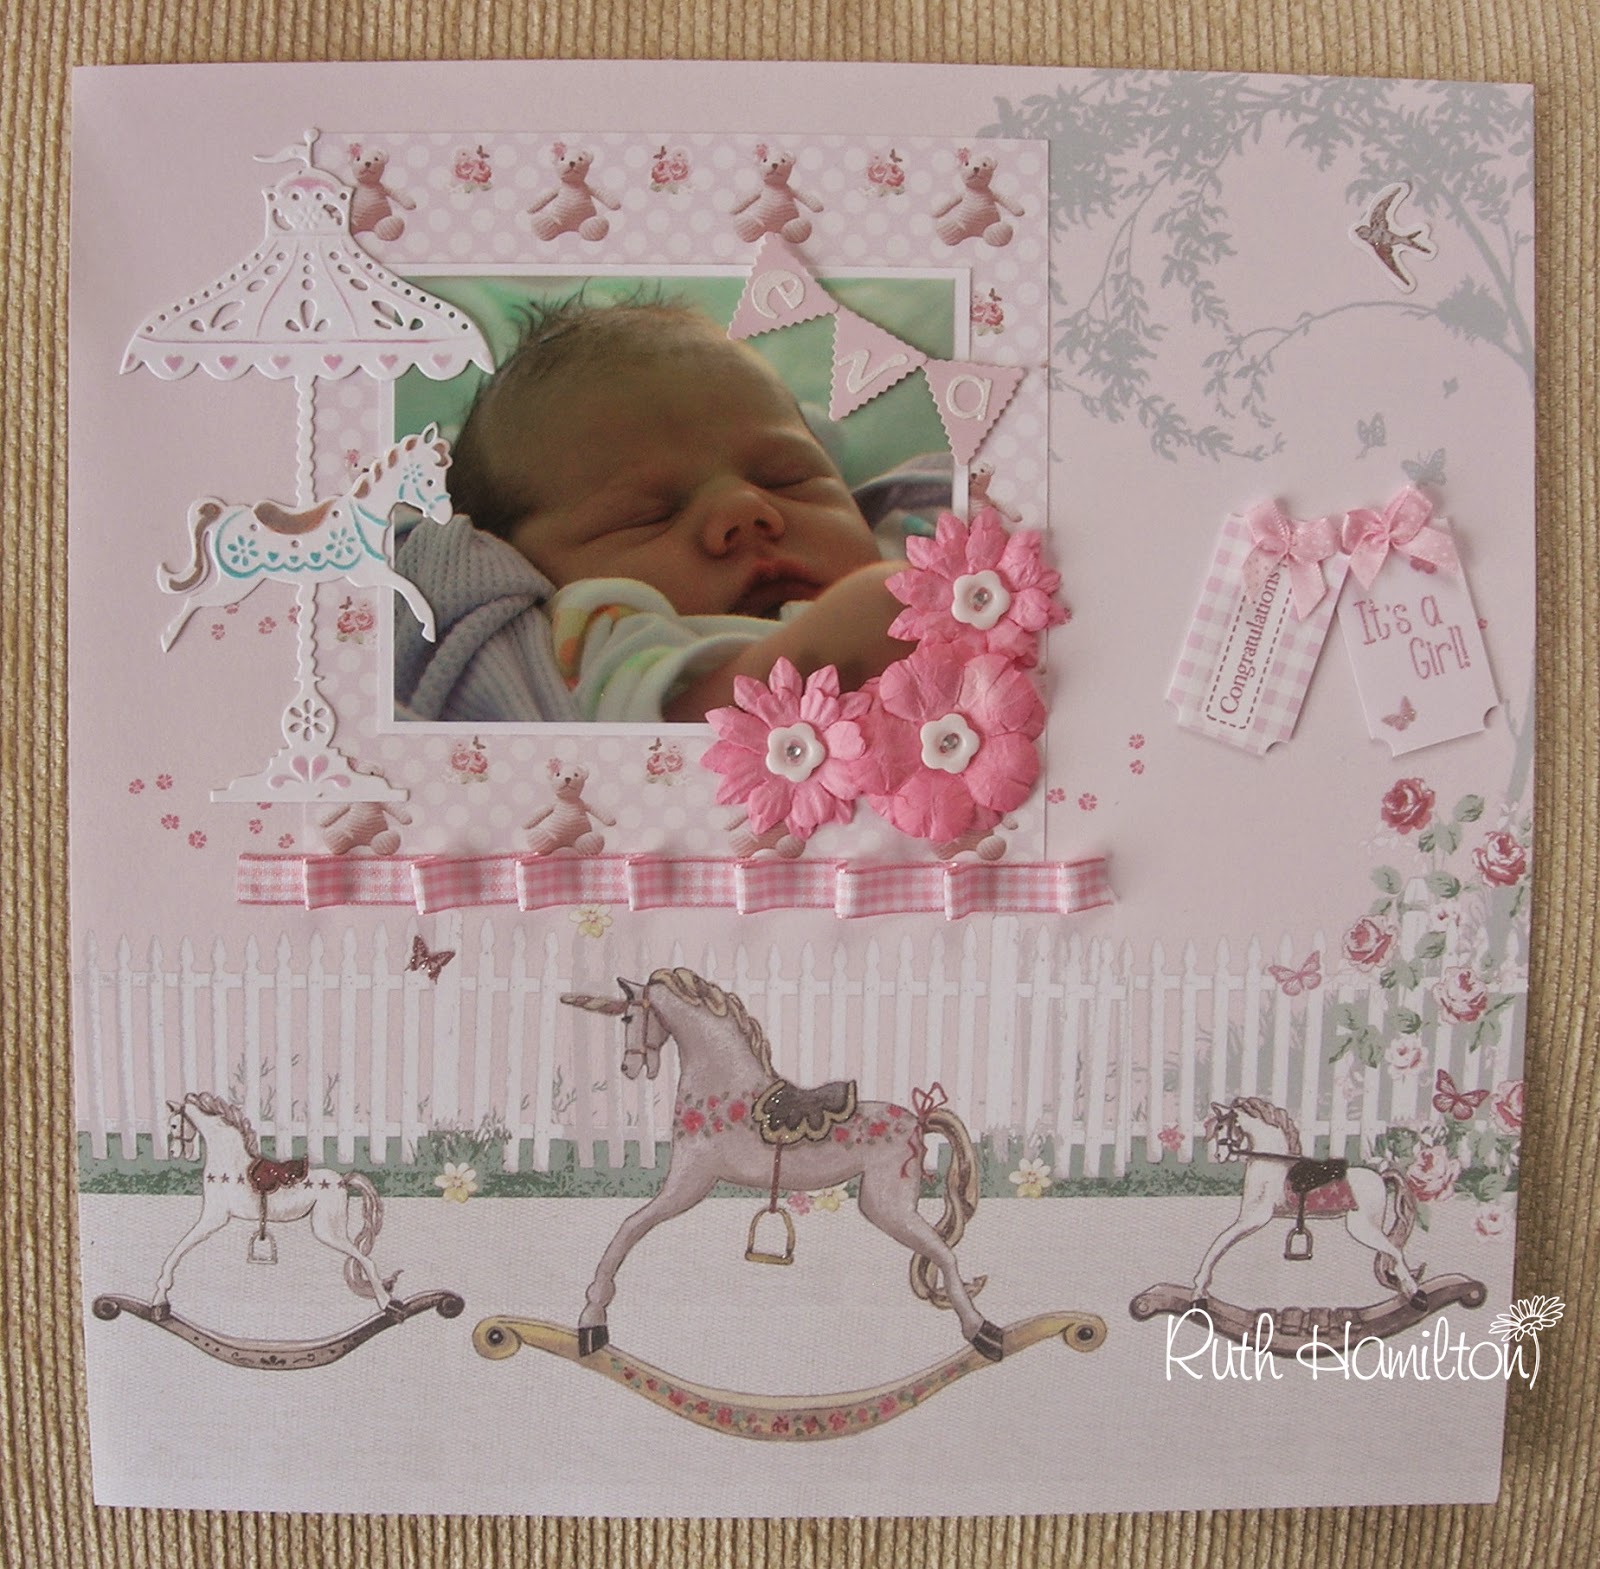 Baby car seat ride girl ~ 2 premade scrapbook pages paper layout